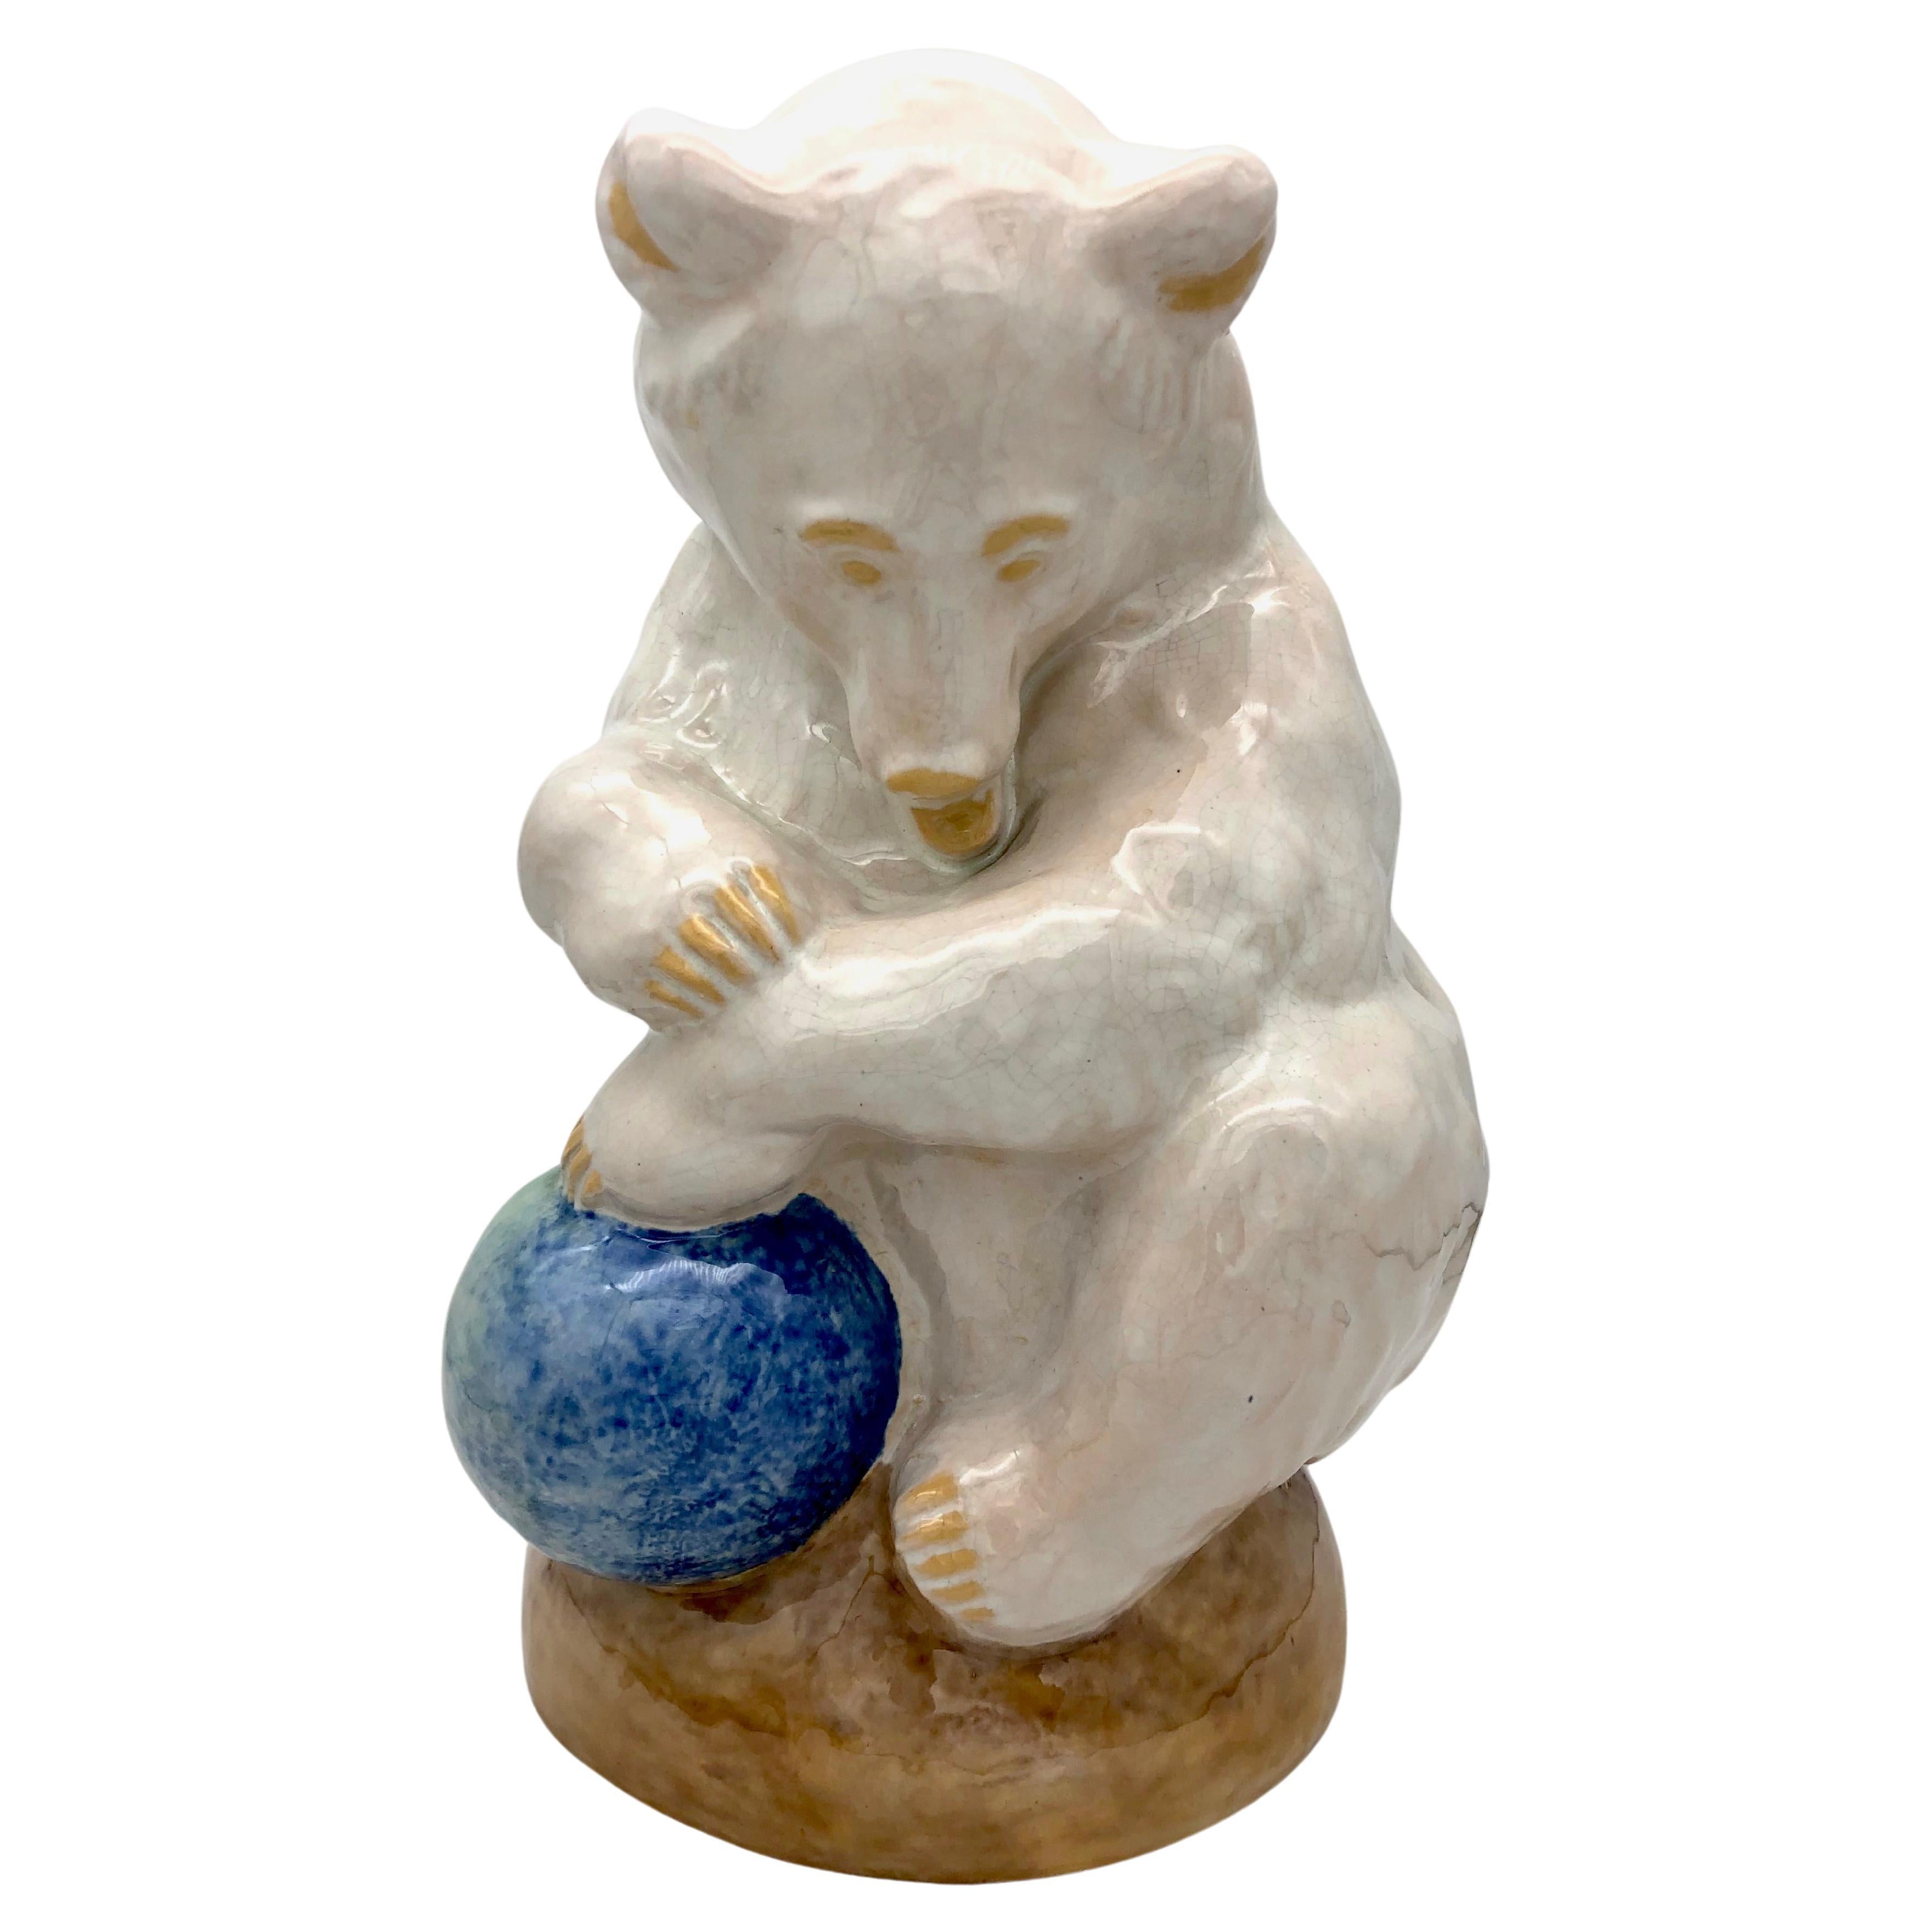 This wonderful sculpture of an ice bear playing with a blue ball is a design by the Austrian Sculptor Franz Barwig (1868 - 1931) dating to 1915-1920. The sculpture was executed by the Wienerberger Keramik company, who executed the works of many